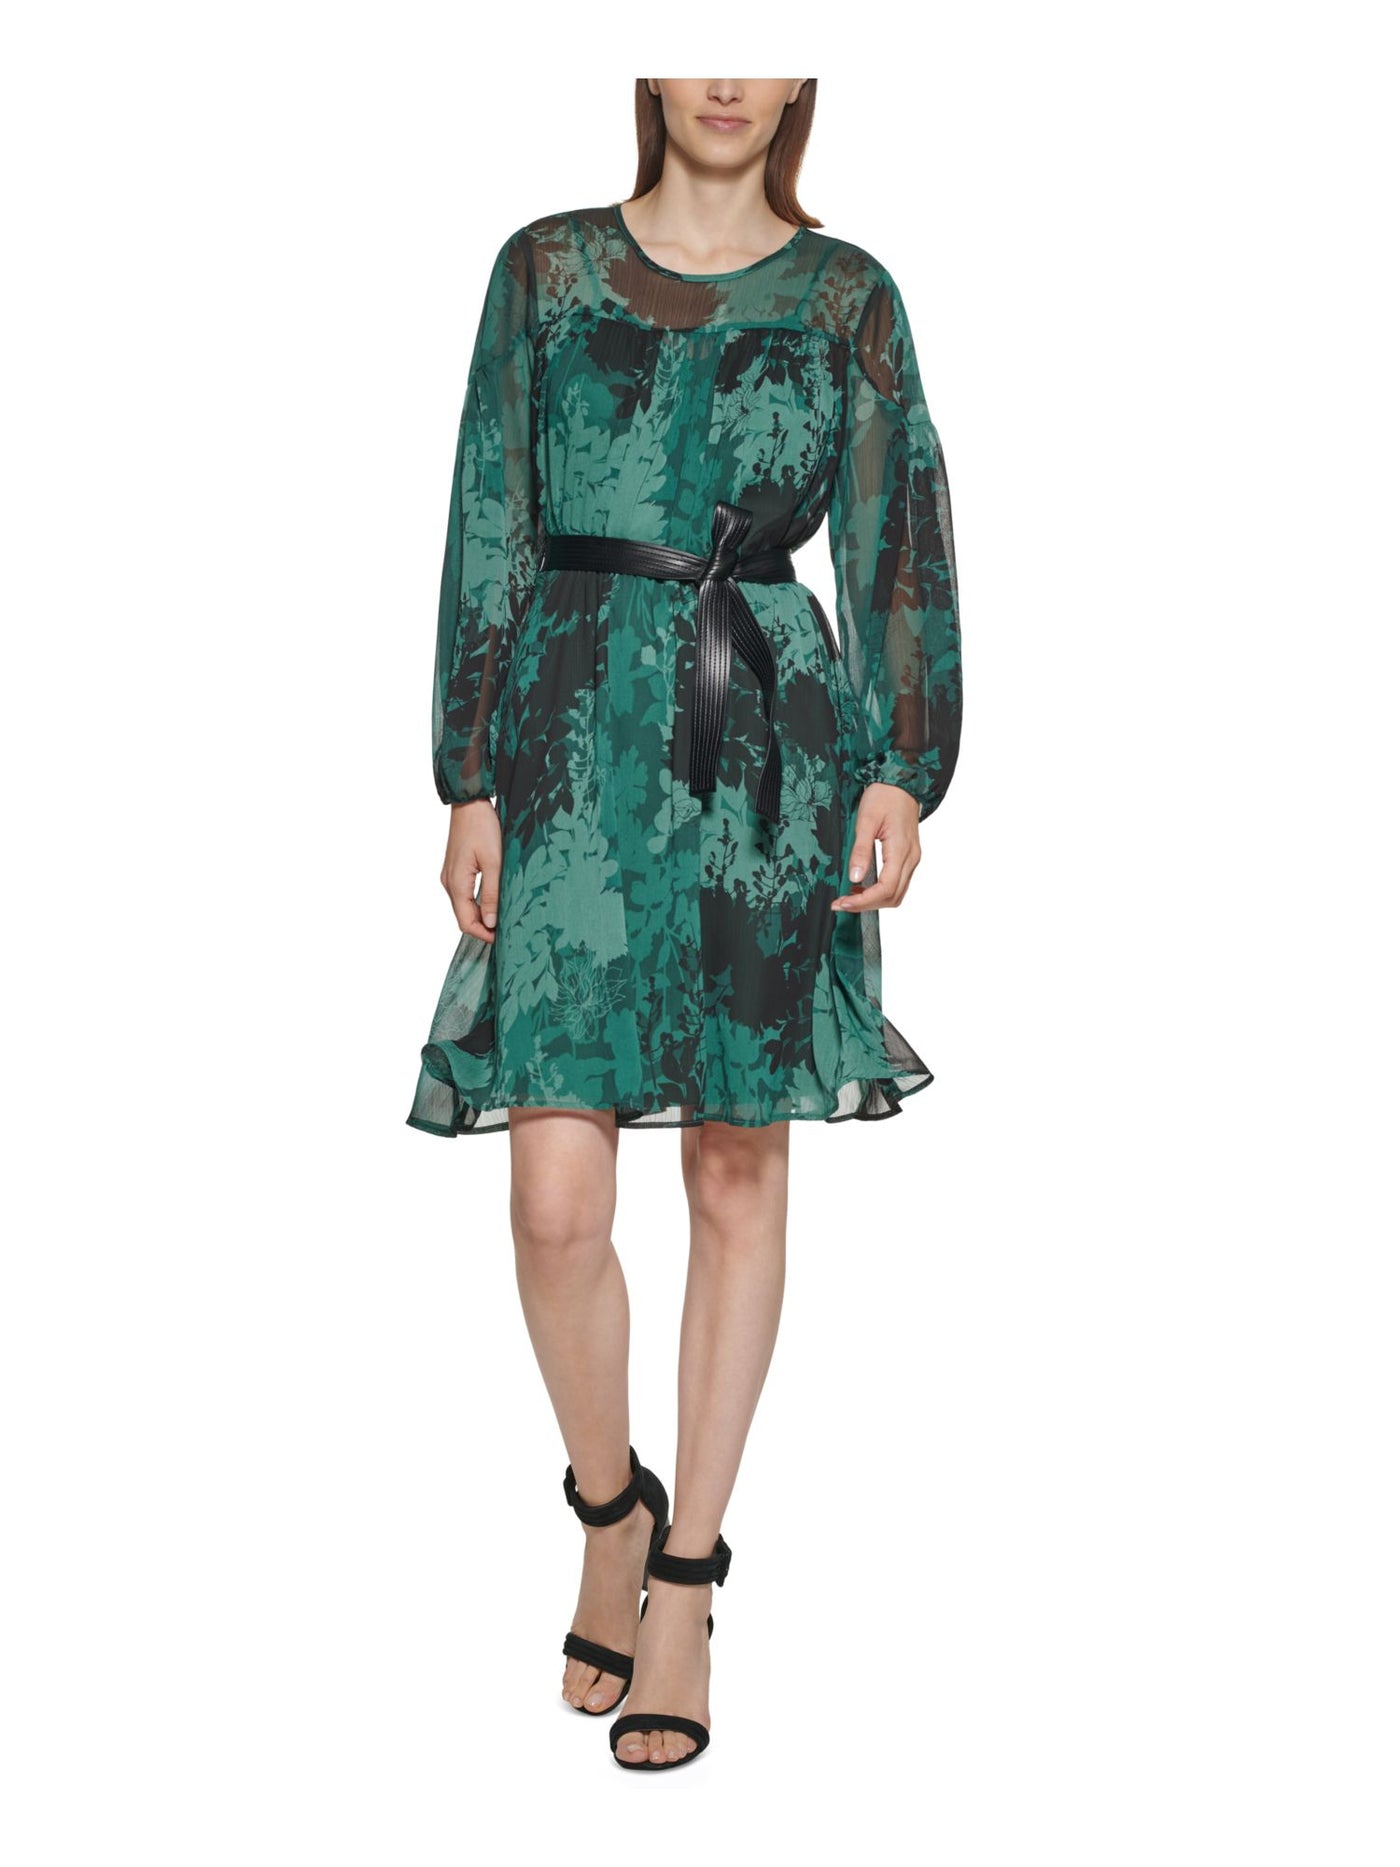 CALVIN KLEIN Womens Green Sheer Button Keyhole Closure Floral Long Sleeve Round Neck Above The Knee Cocktail A-Line Dress 6